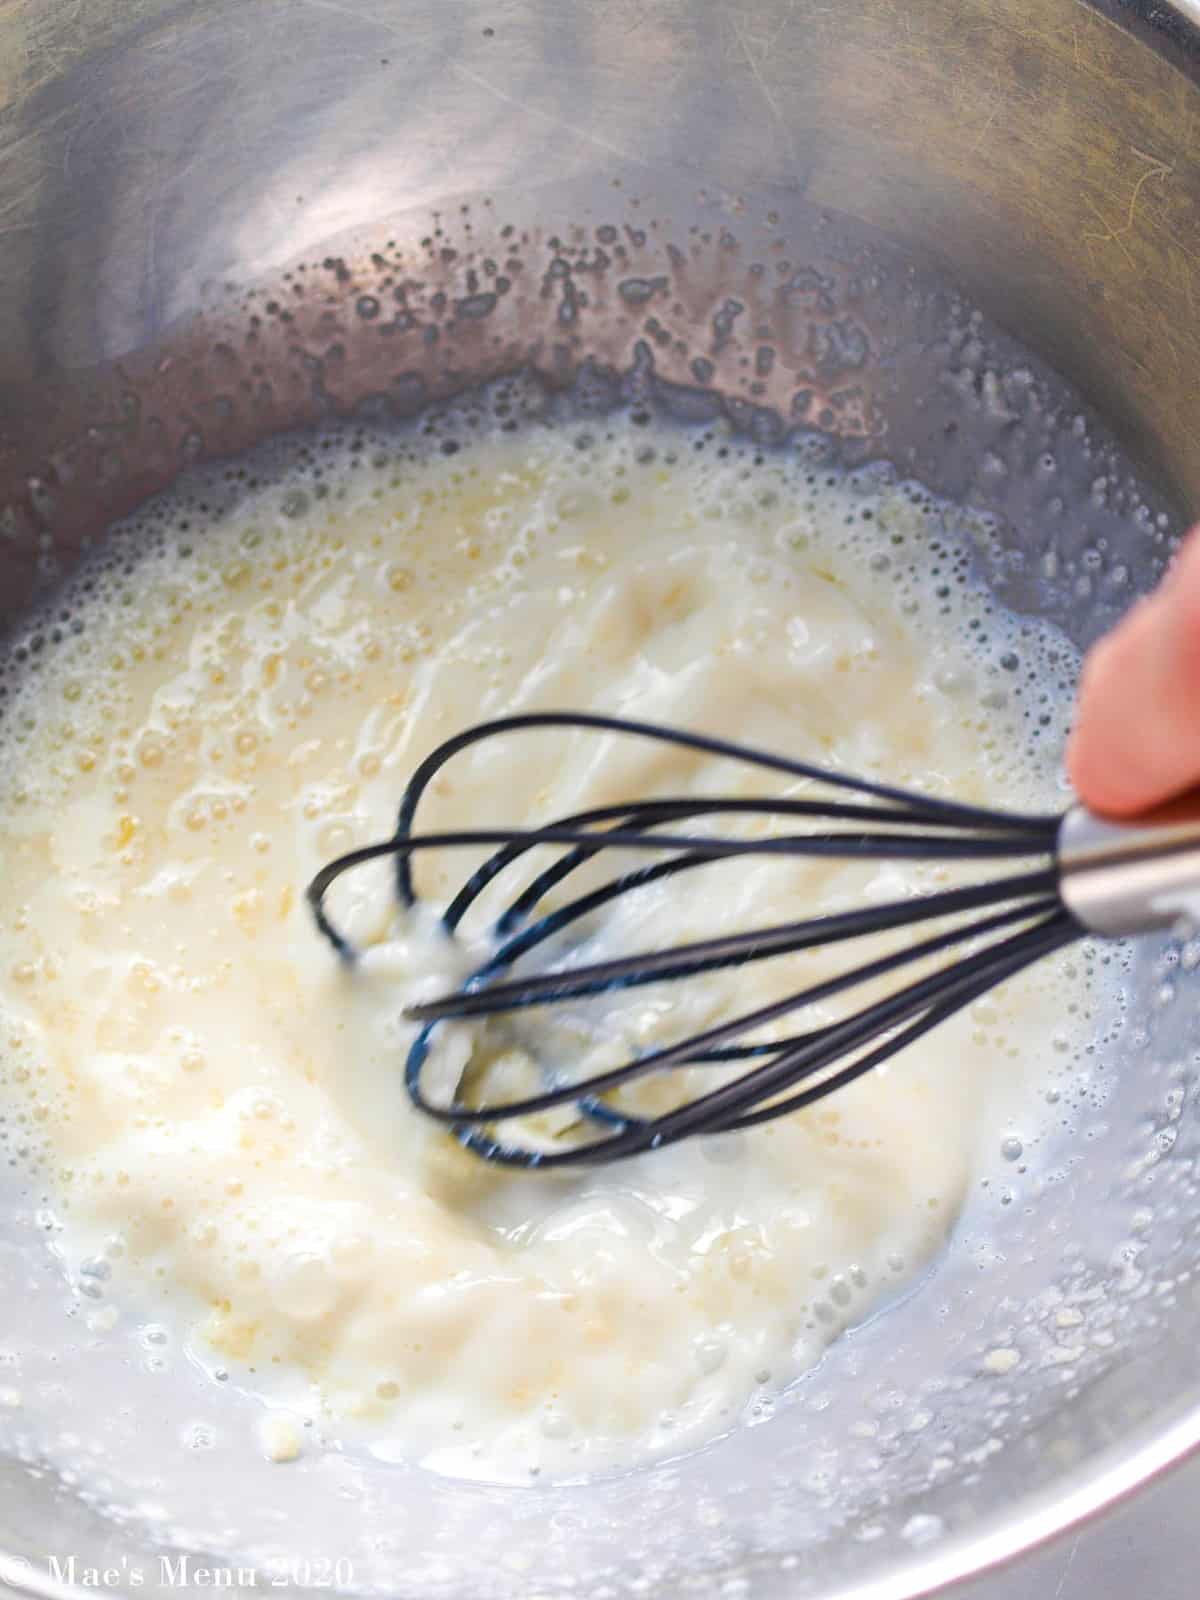 Whisking the wet ingredients together